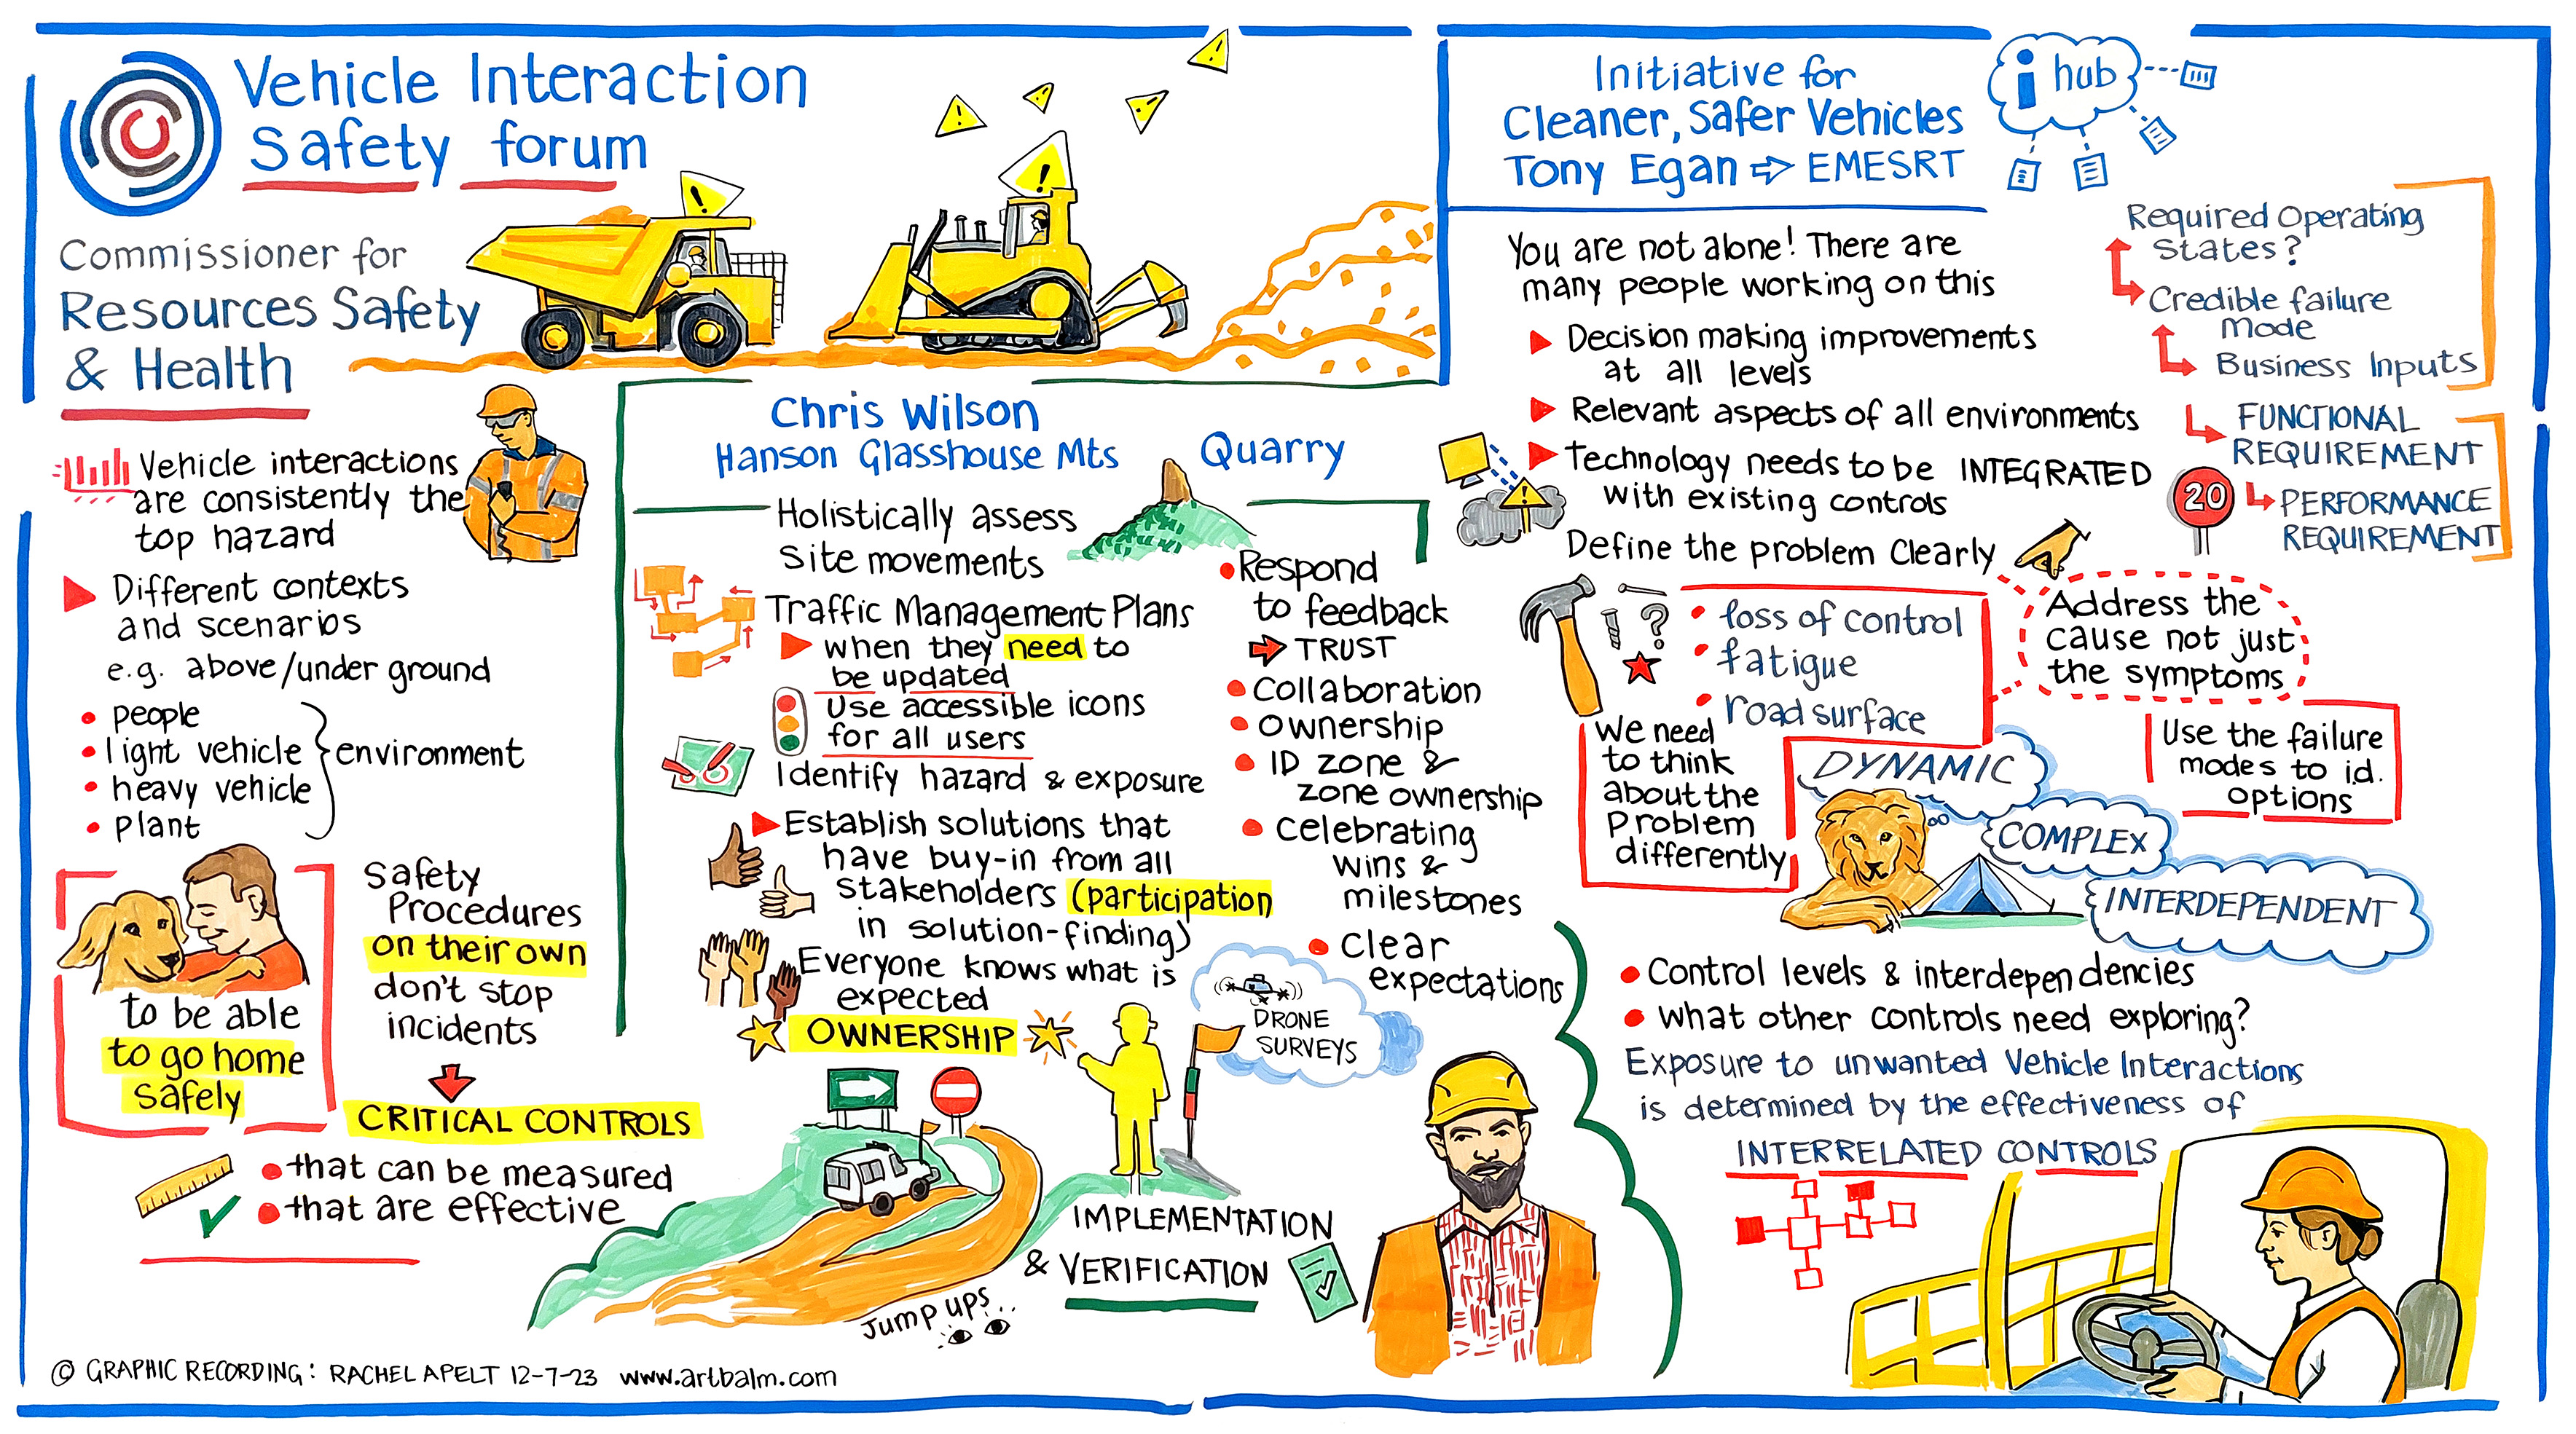 MSHAC vehicle interaction safety forum graphic recording